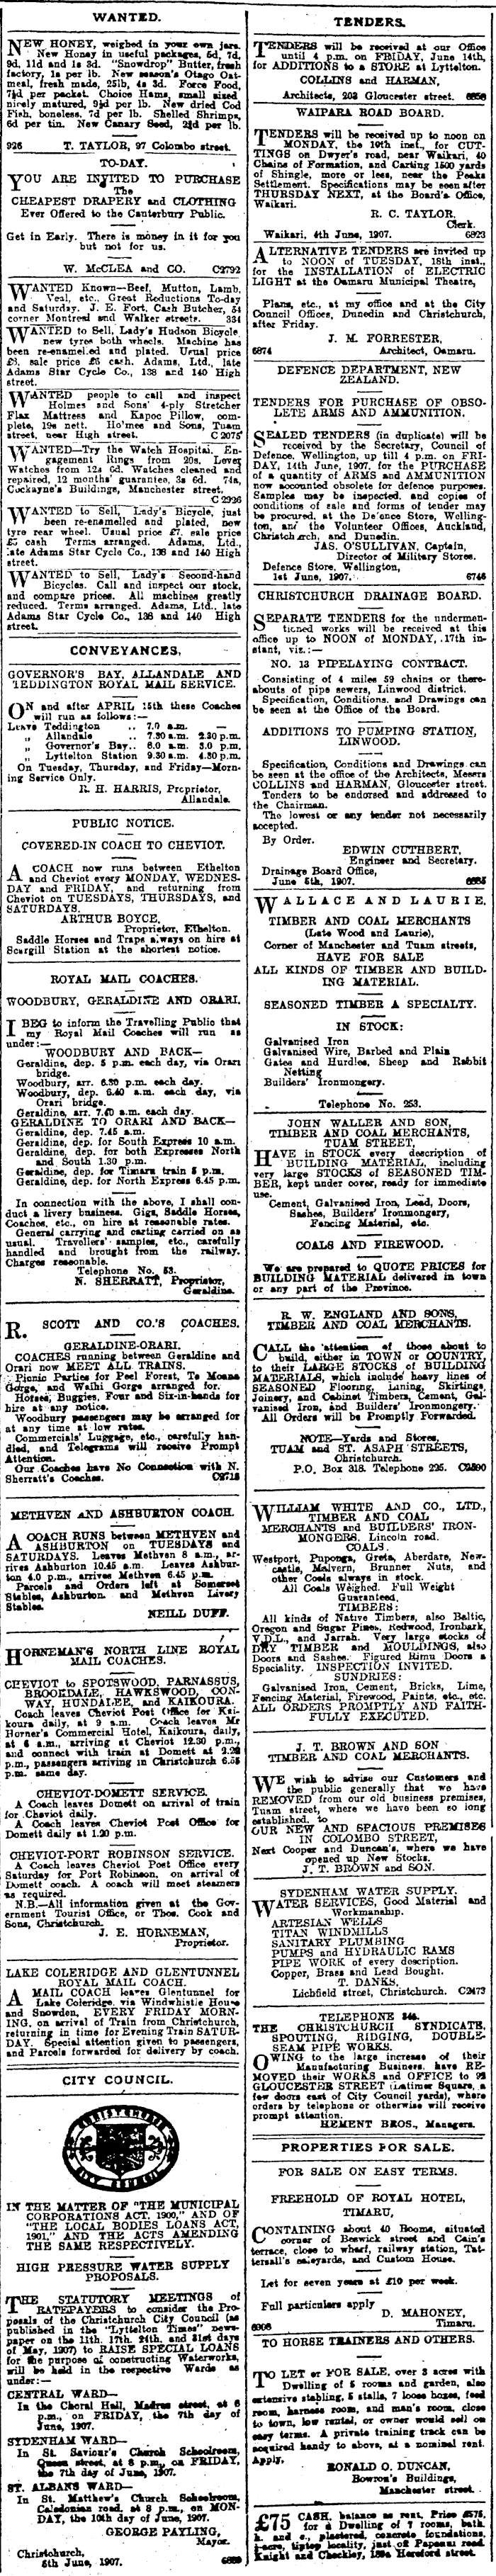 Papers Past Newspapers Press 7 June 1907 Page 11 Advertisements Column 3